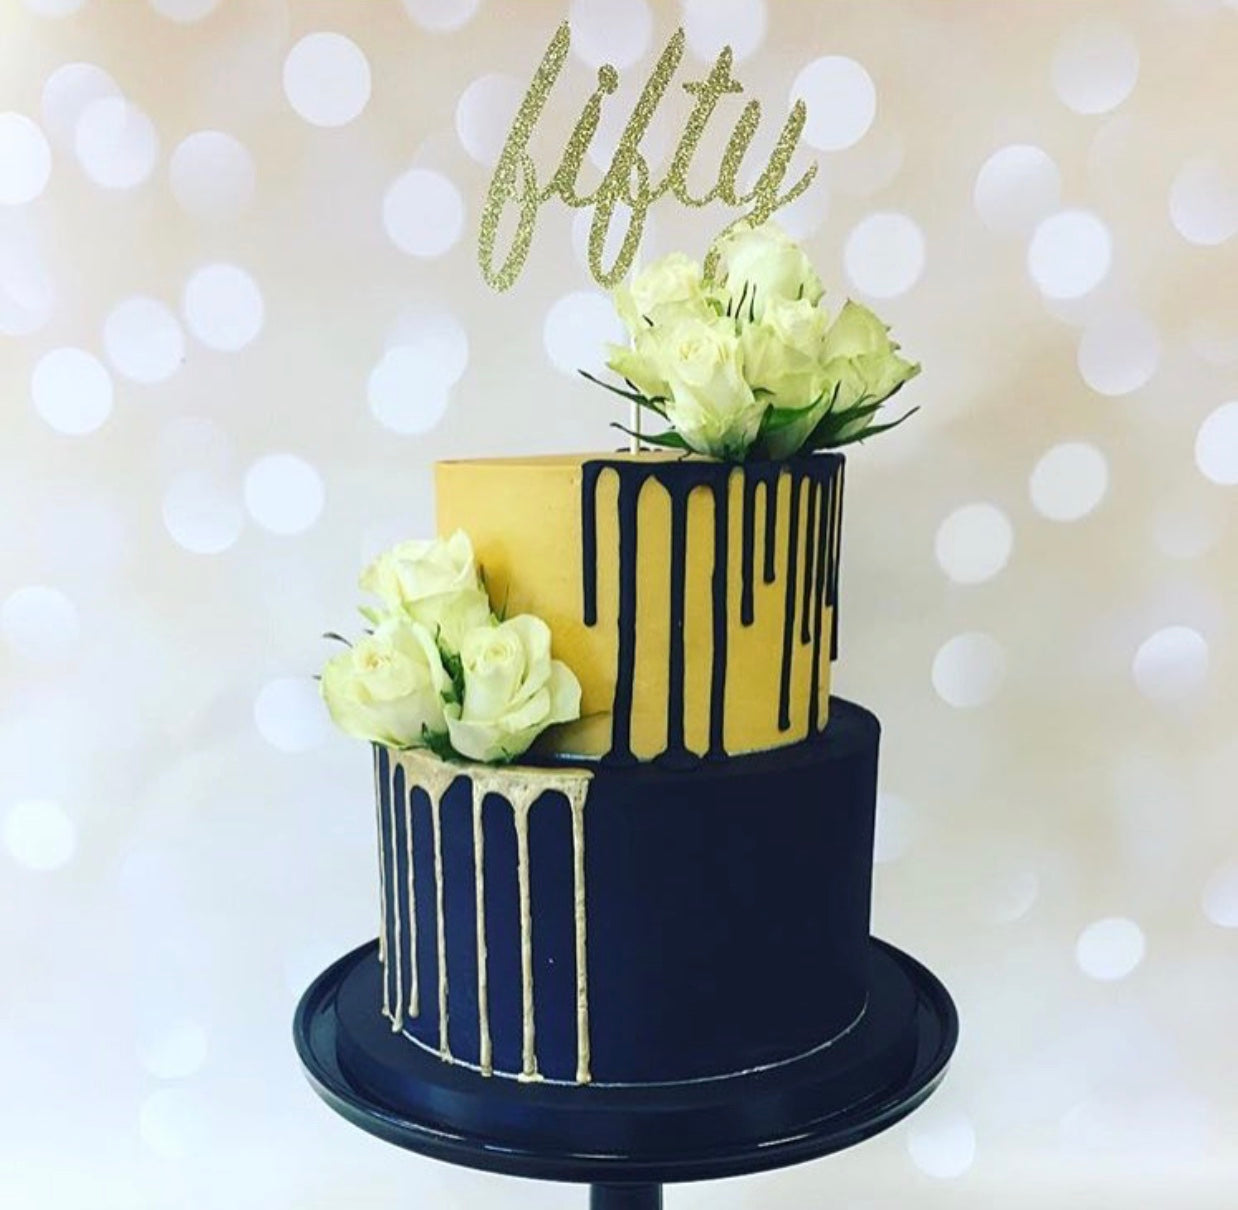 AGE (WORD IN CLASSIC FONT) | CAKE TOPPER